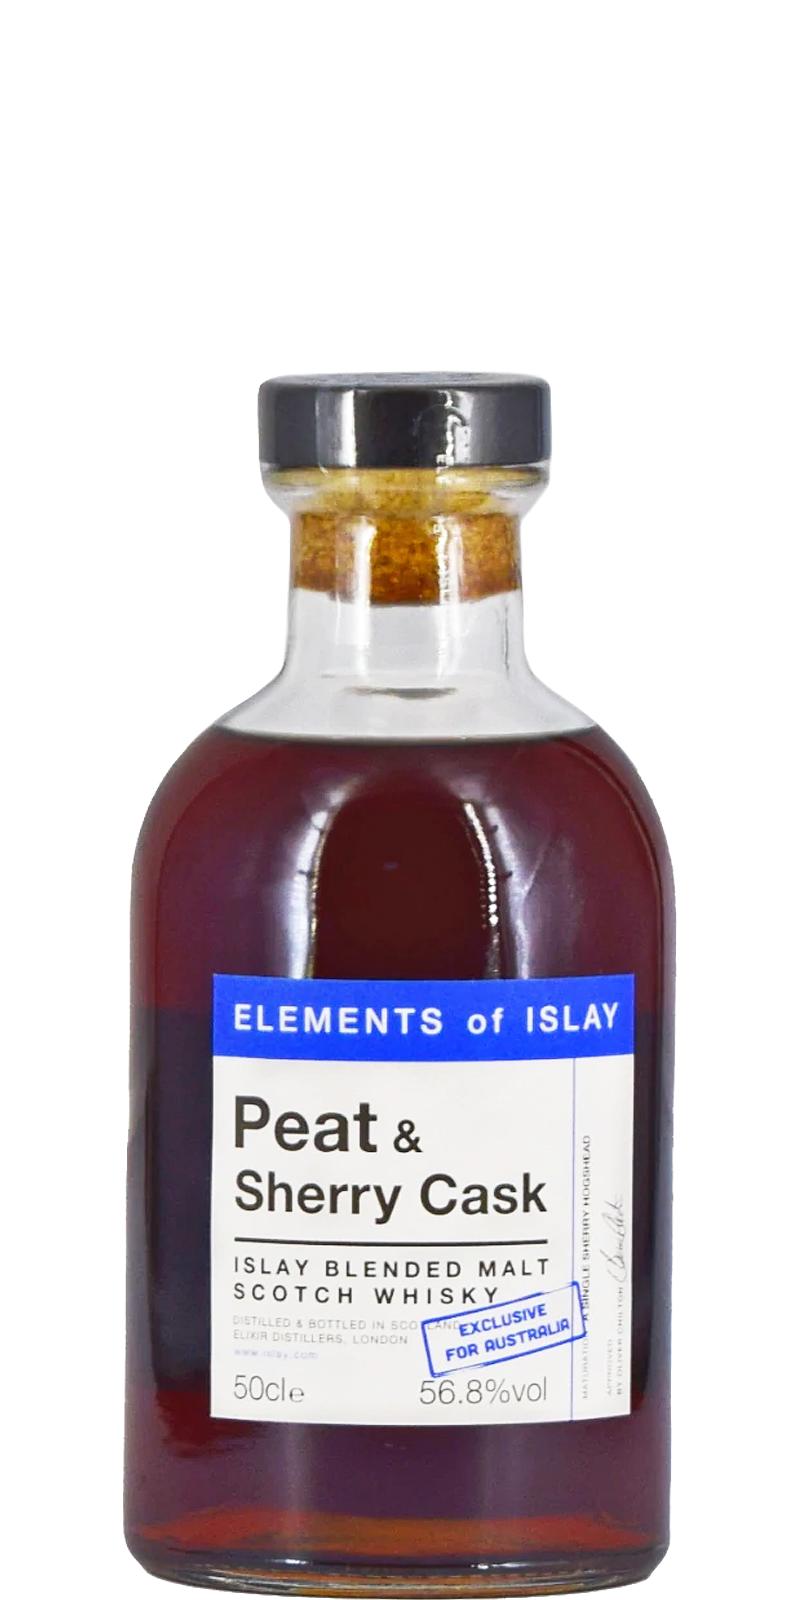 Peat & Sherry Islay Blended Malt Scotch Whisky ElD Exclusive for Australia 56.8% 500ml